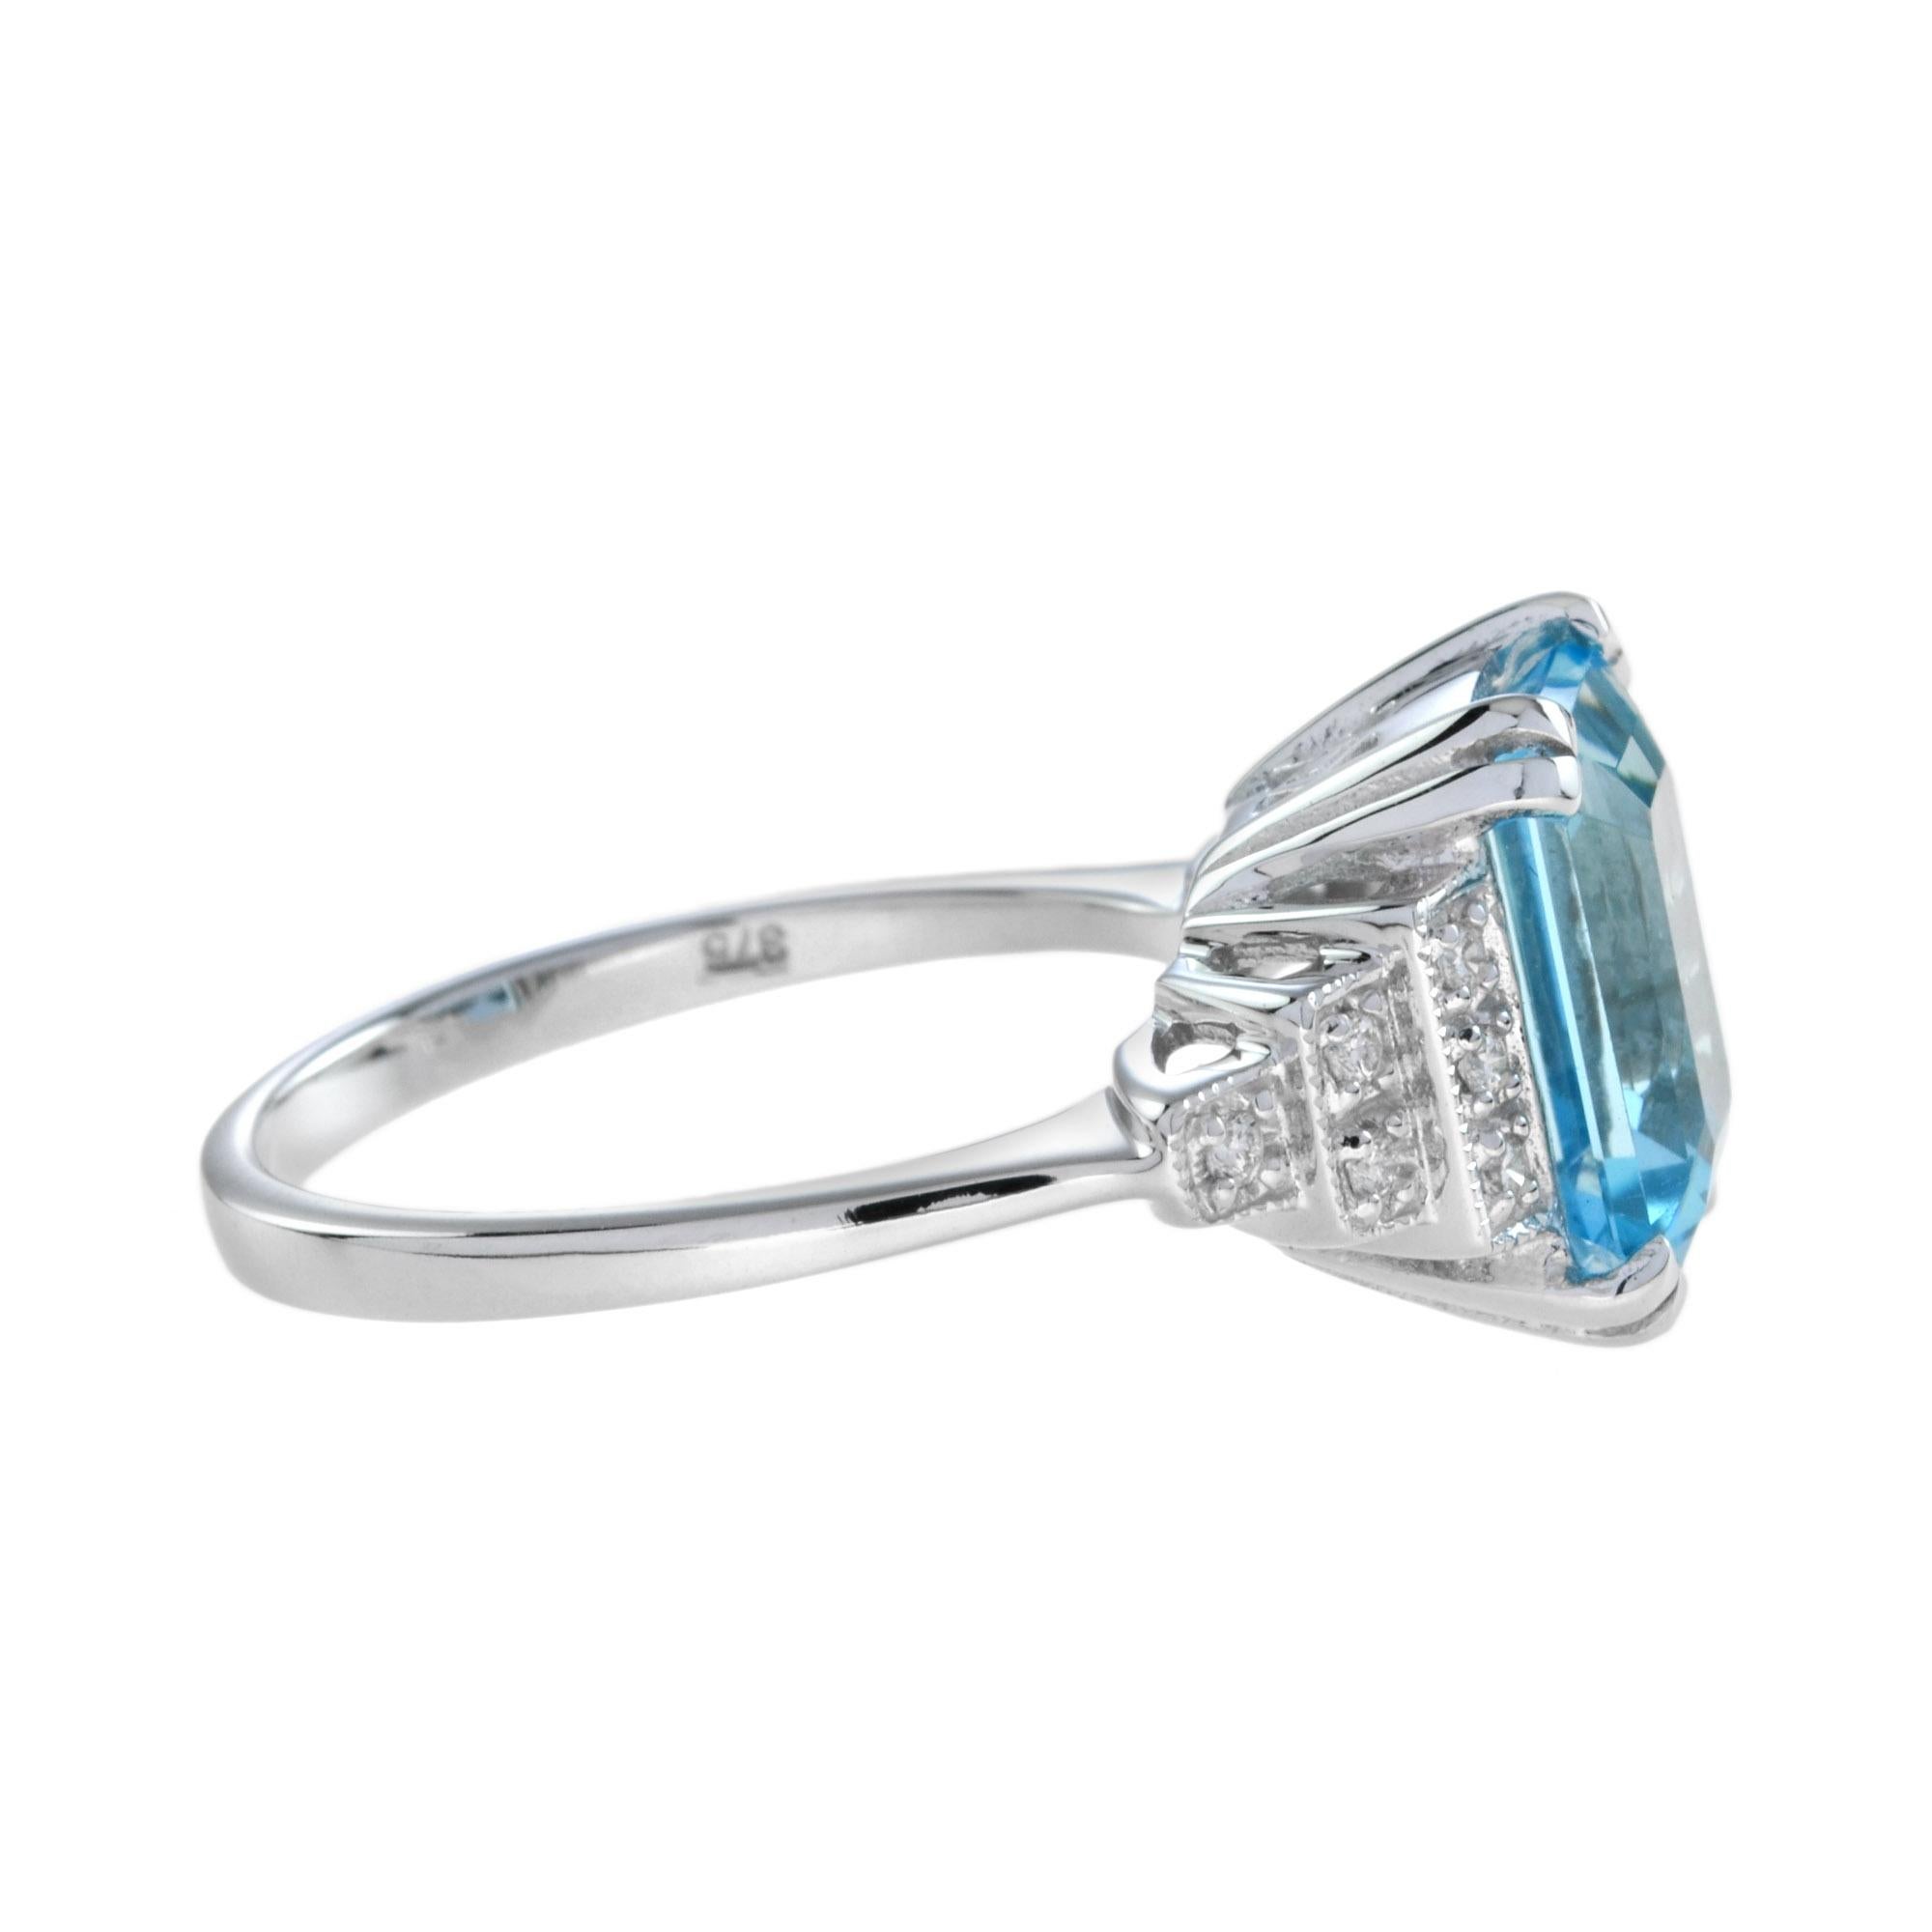 For Sale:  Emerald Cut Blue Topaz and Step Diamond Engagement Ring in 18K White Gold 3